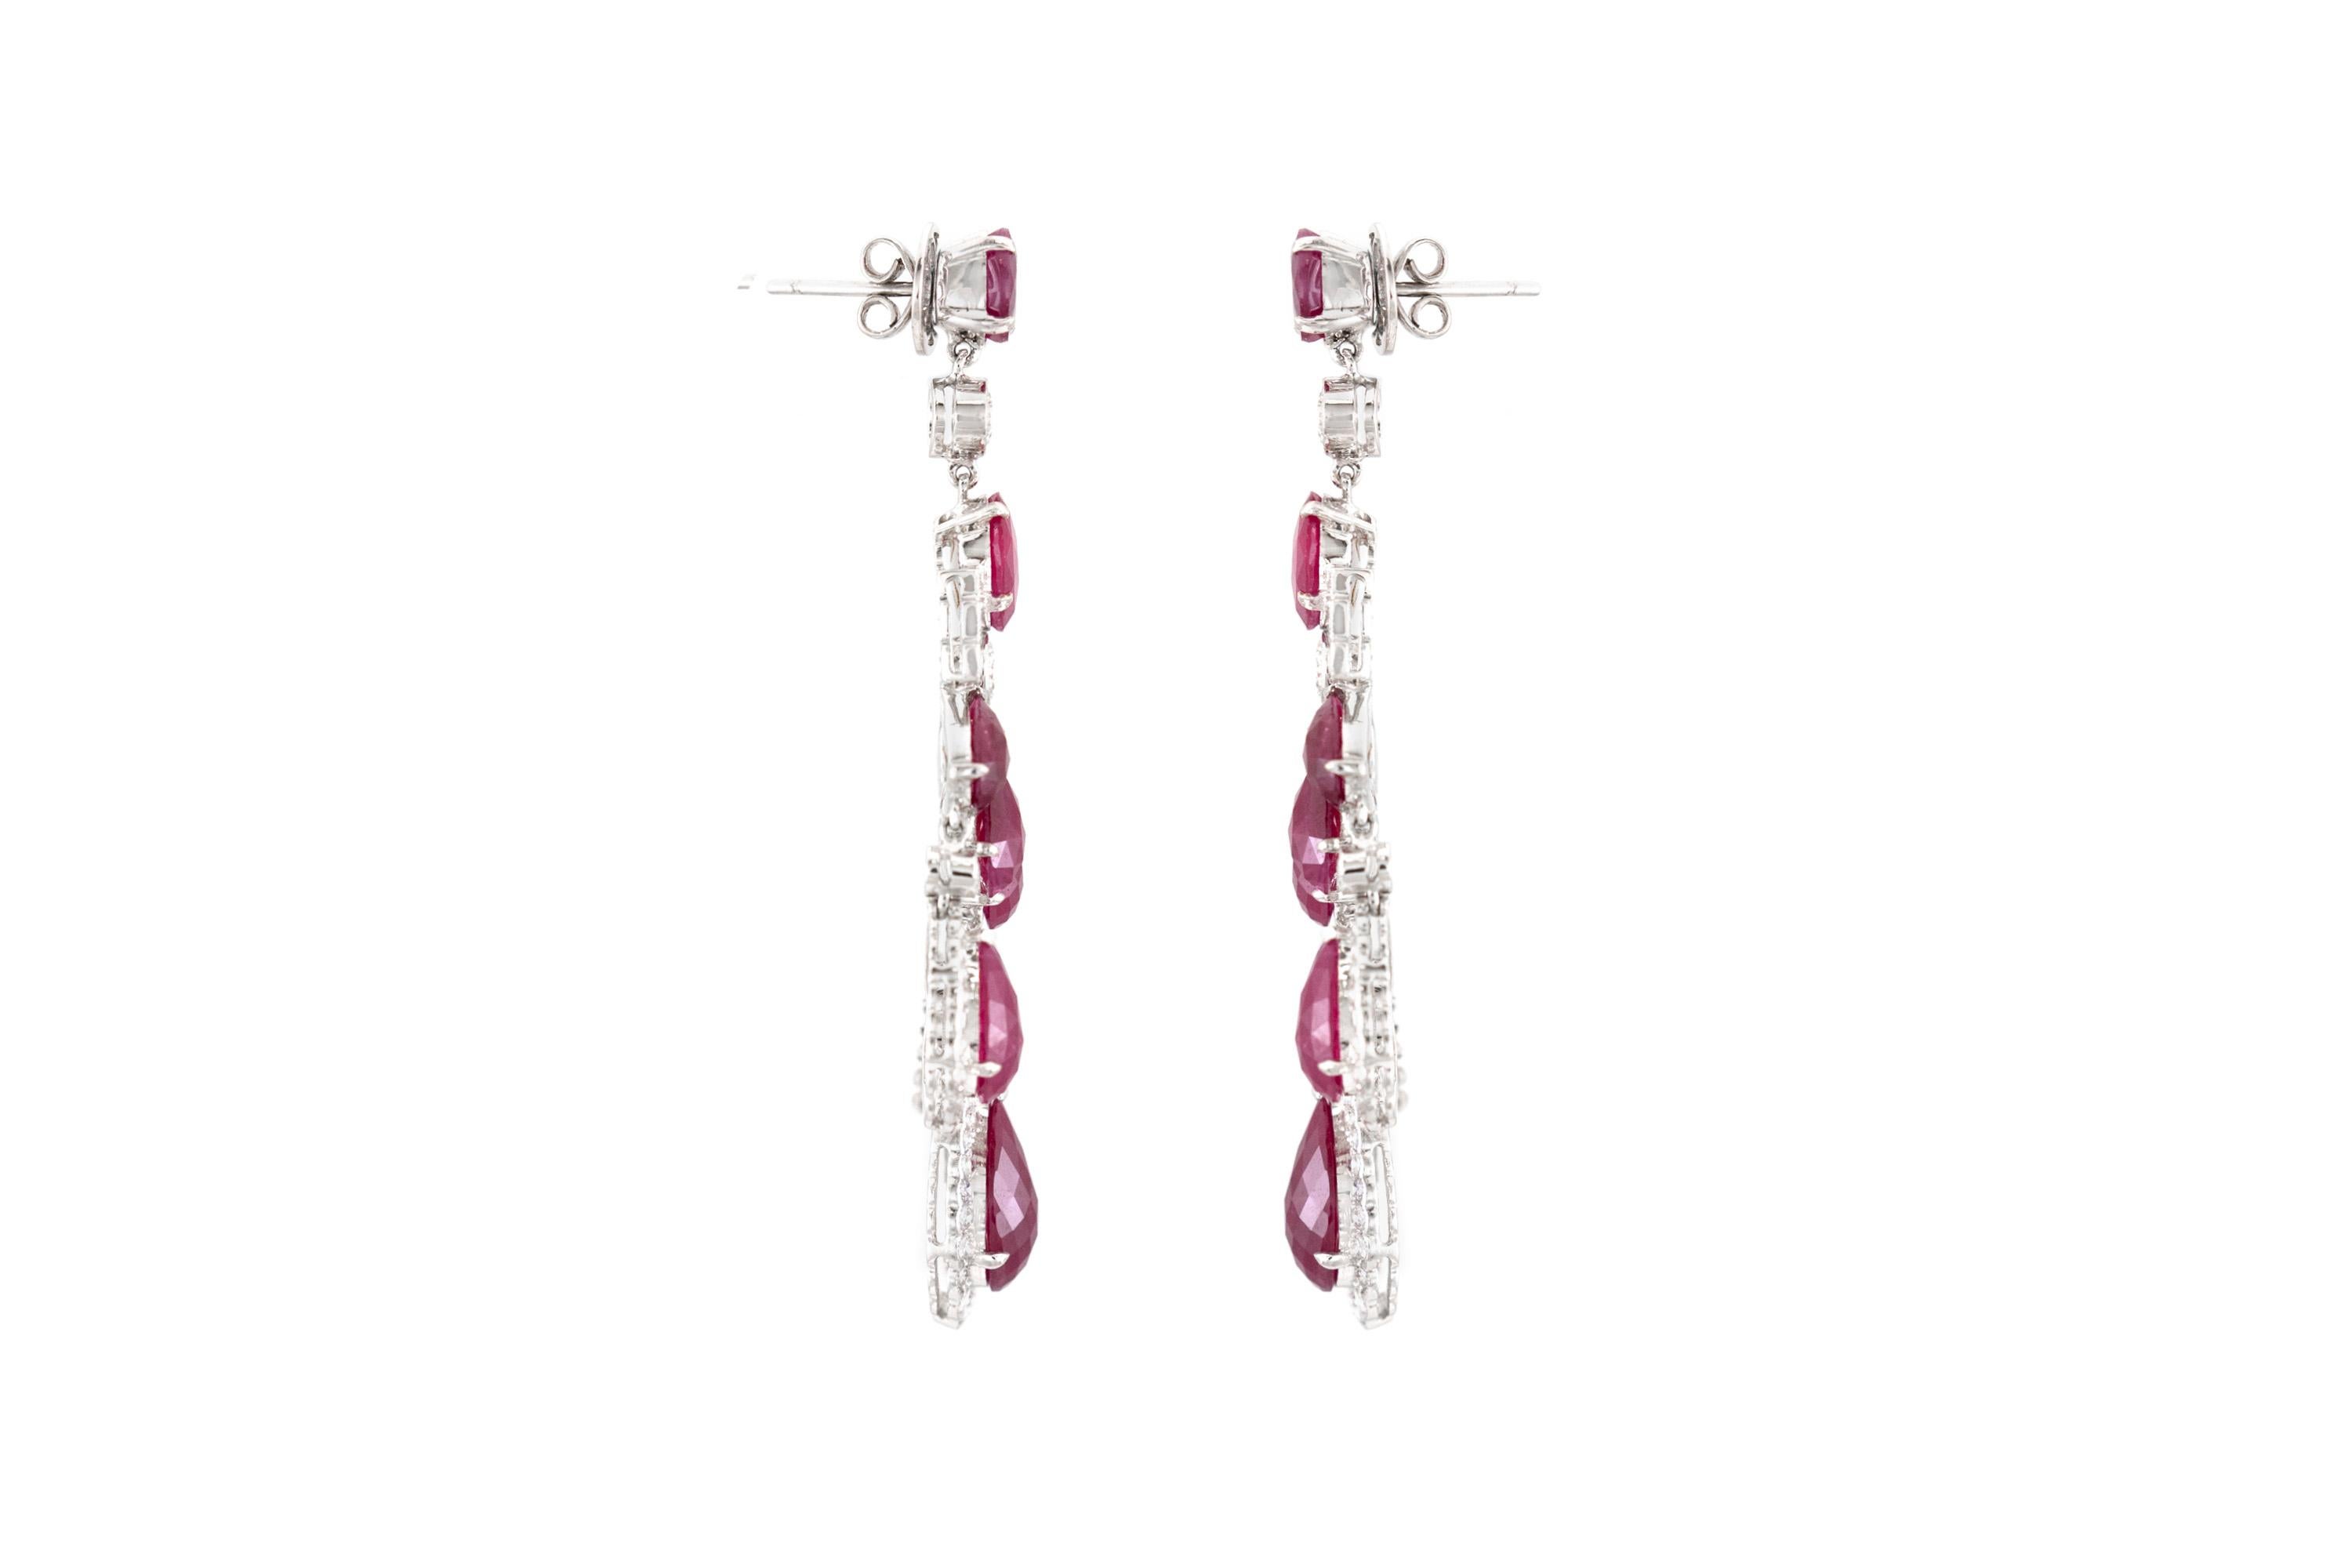 The earrings are finely crafted in 18k white gold with diamonds weighing approximately total of 4.19 and rubies weighing approximately total of 27.6 carat.
Citrca 1980